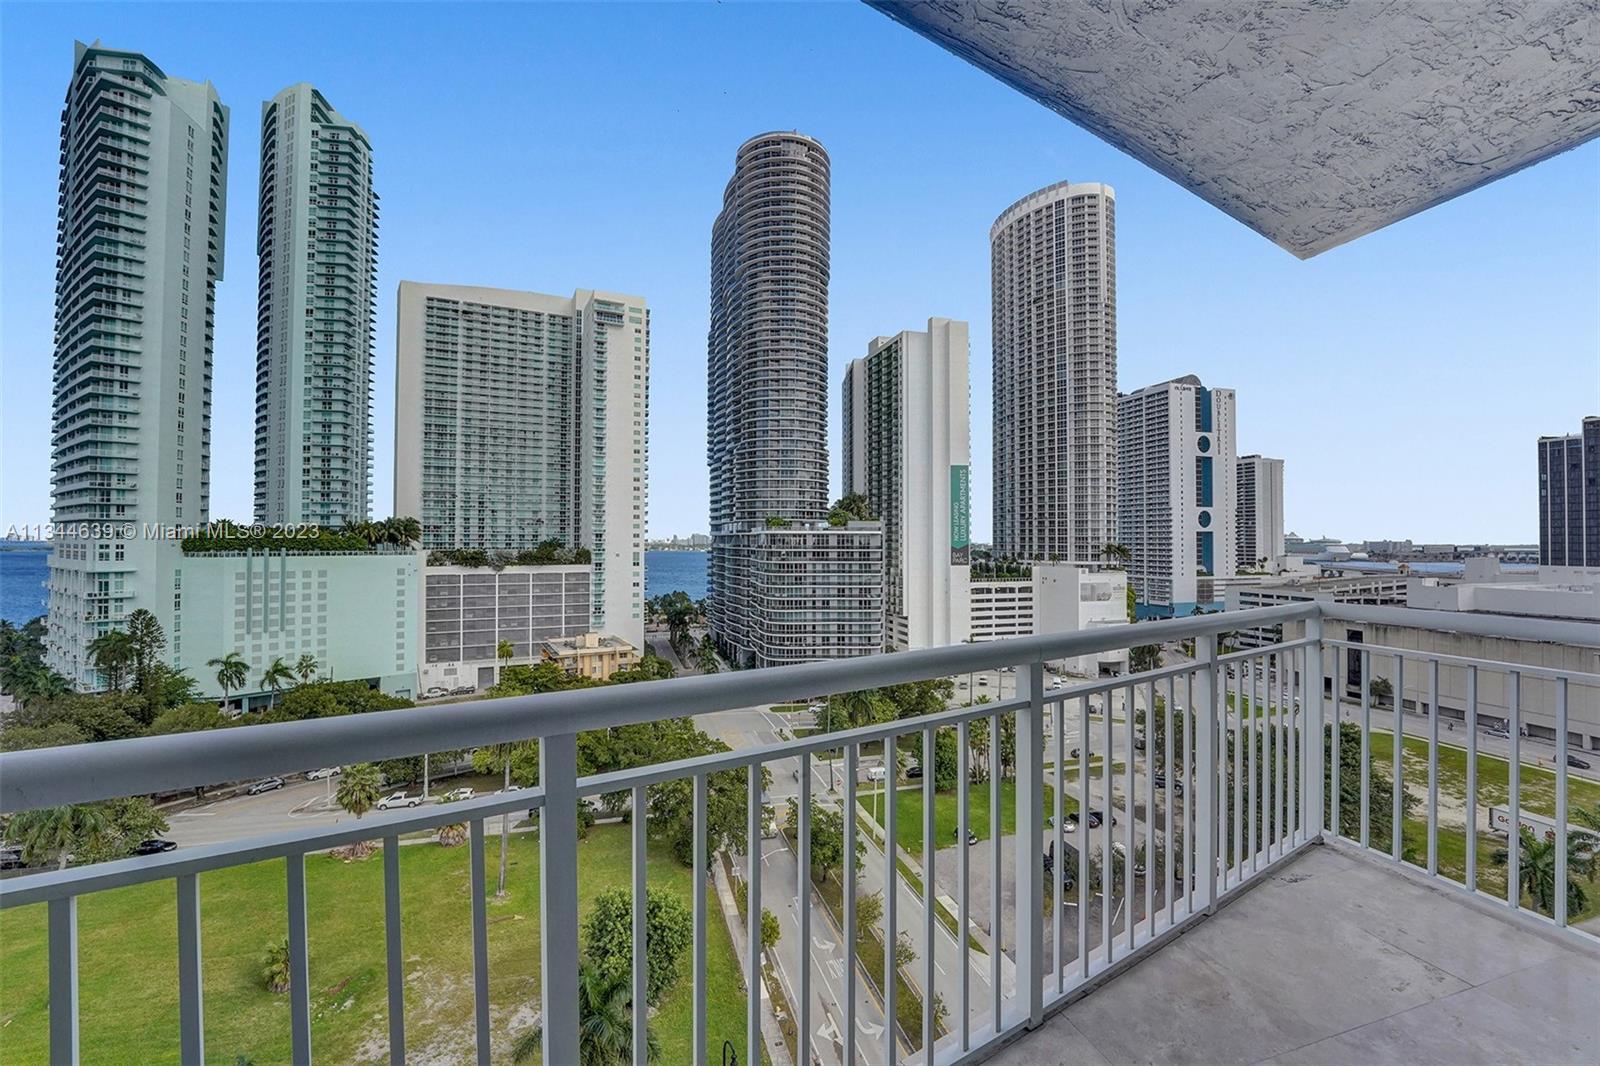 Beautiful corner 3 bedroom, 2 bathroom Edgewater condo with 2 assigned parking spots!  This unit has panoramic views of the bay, cruise ships and downtown Miami.  Features include travertine stone floors, white open kitchen with granite countertops and SS appliances, washer/dryer in unit, clubhouse, pool and 5-star fitness center. Located 1/2 block from Publix and Margaret Pace Bay Front Park with tennis, volleyball, basketball and doggy park.  Pets welcome.